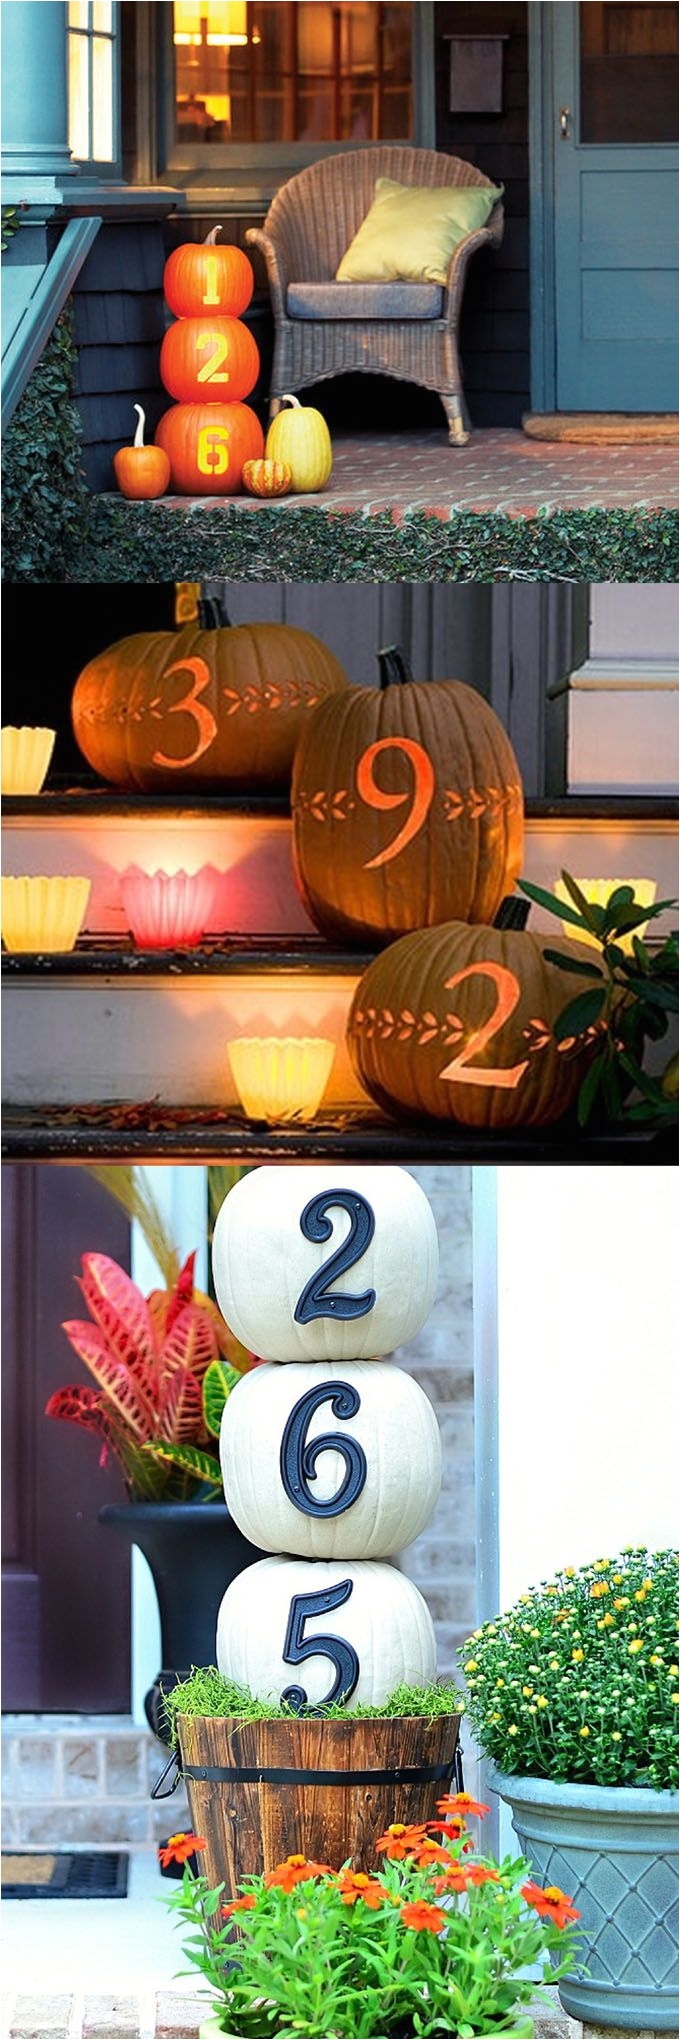 25 splendid diy fall decorations for your front door and porch from pumpkin house numbers